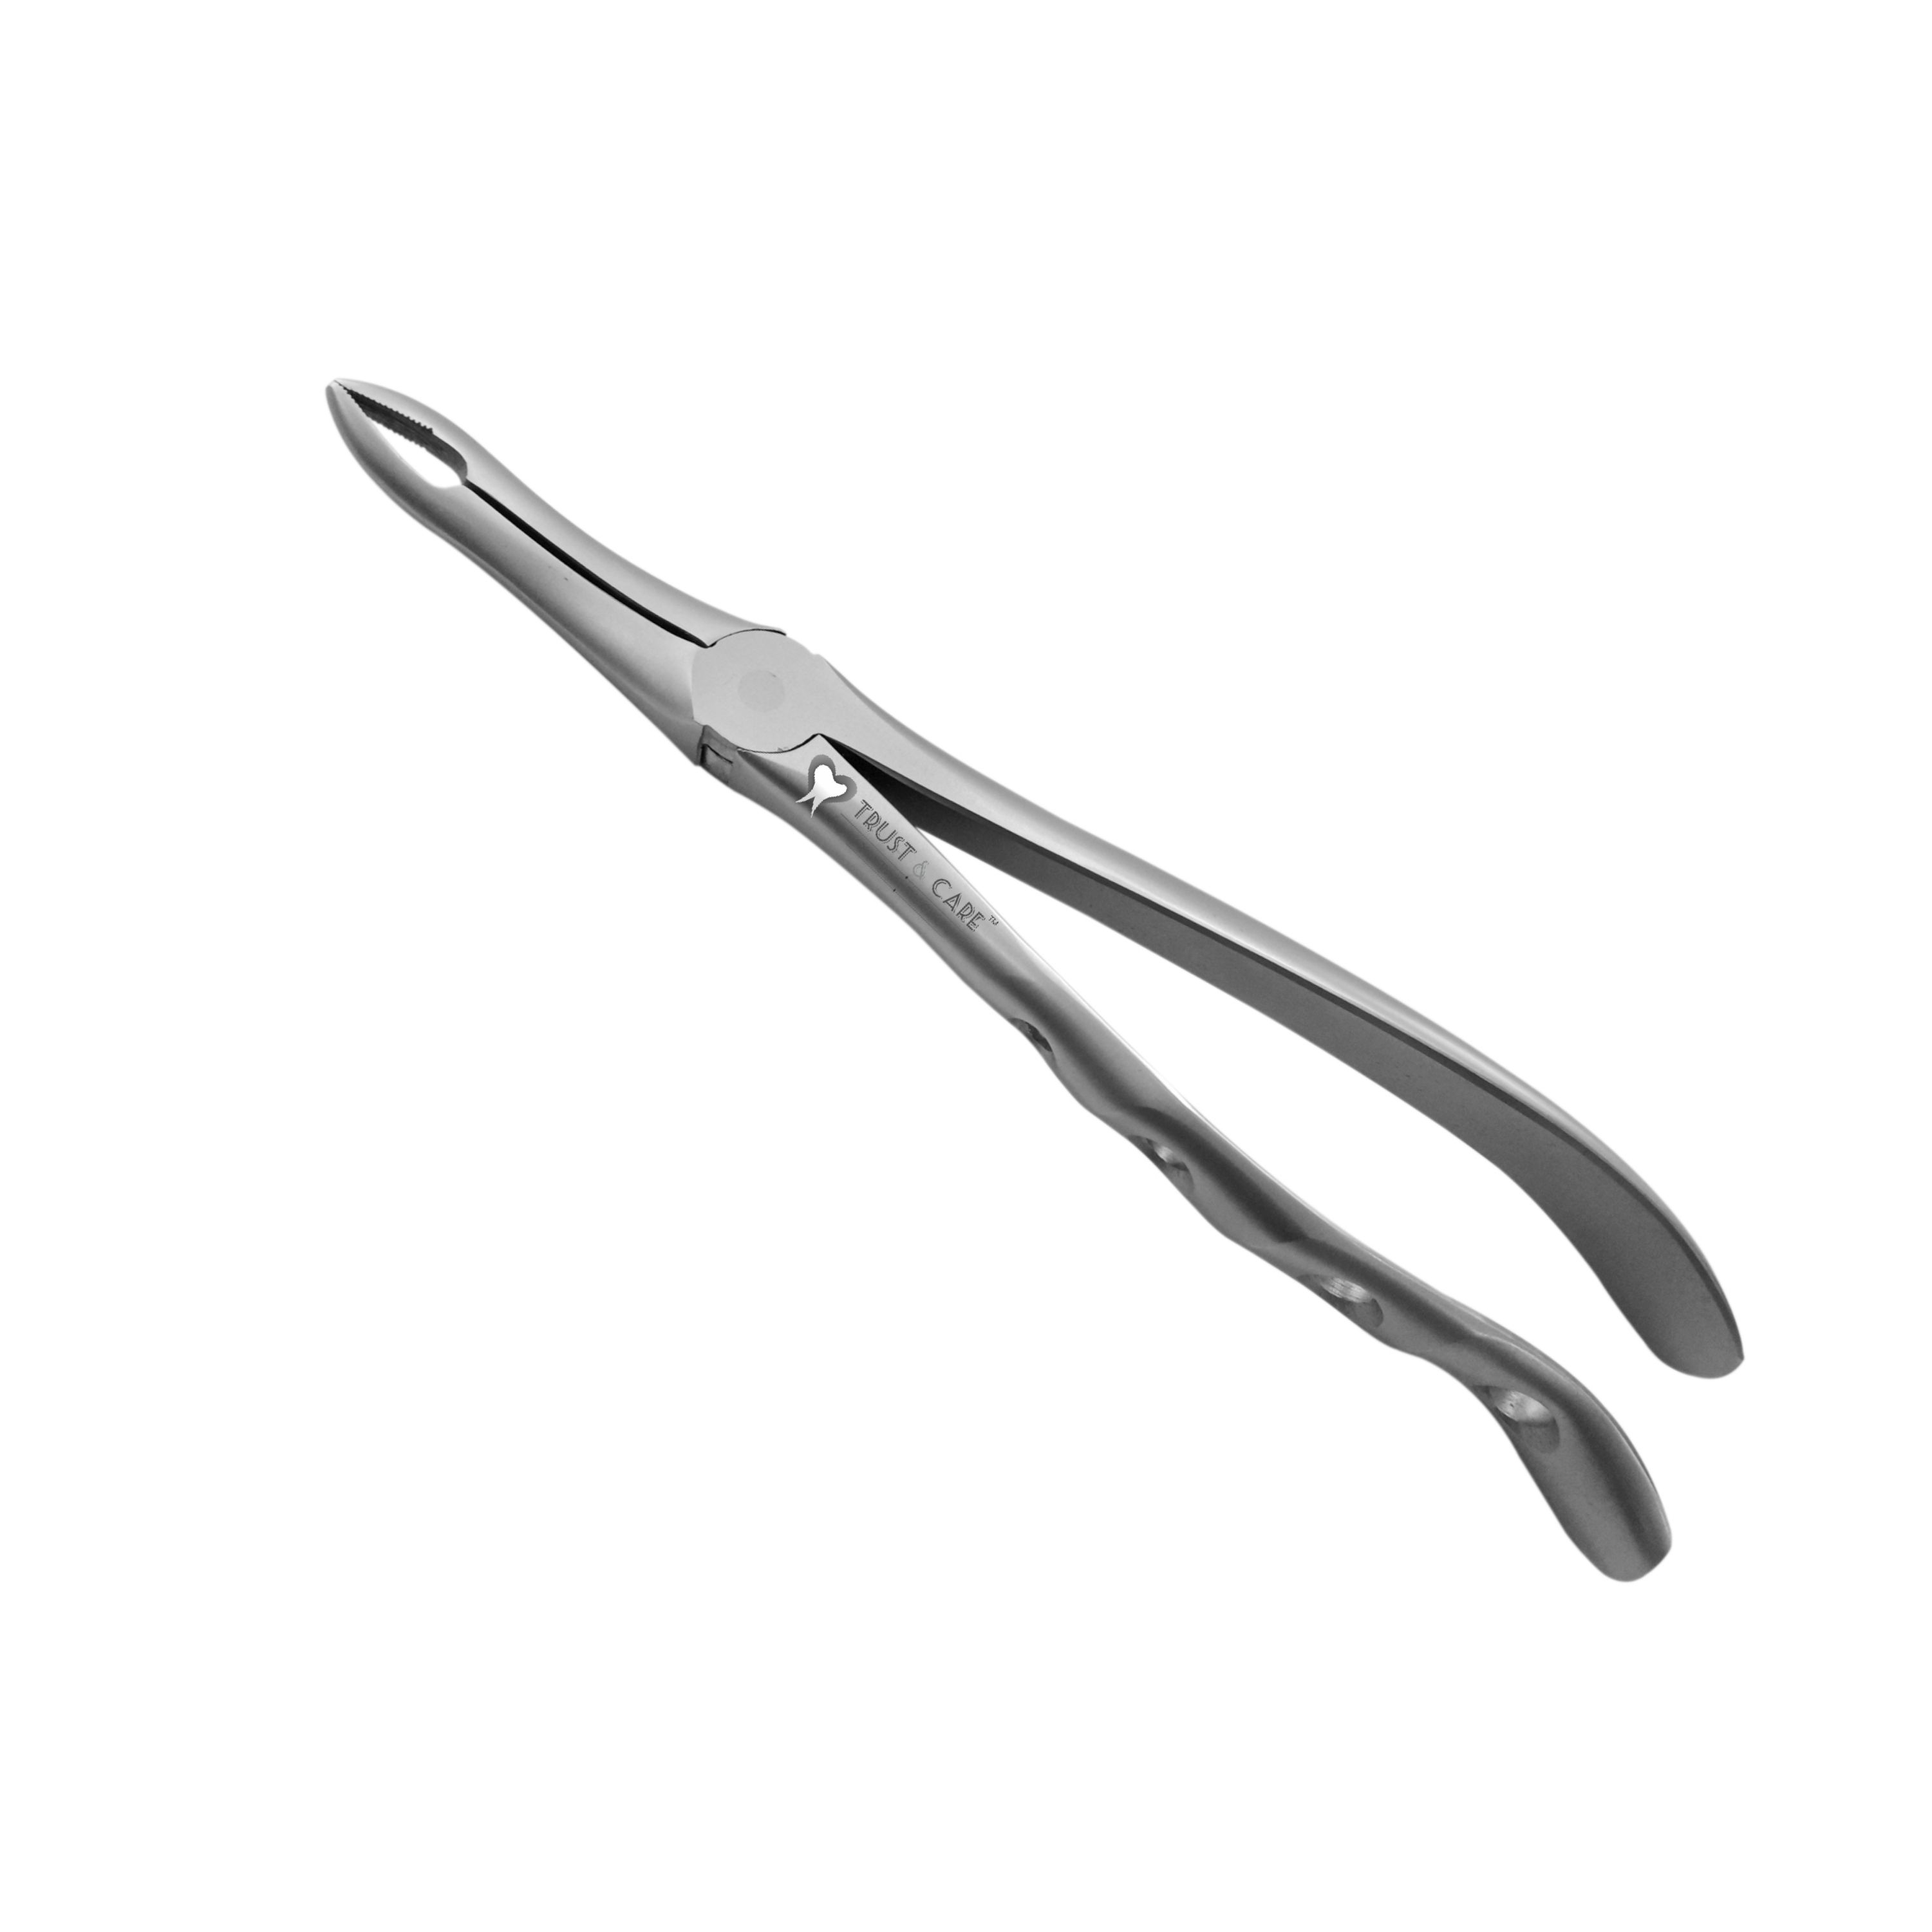 Trust & Care Secure Forcep Upper Roots Fig No. 849.00